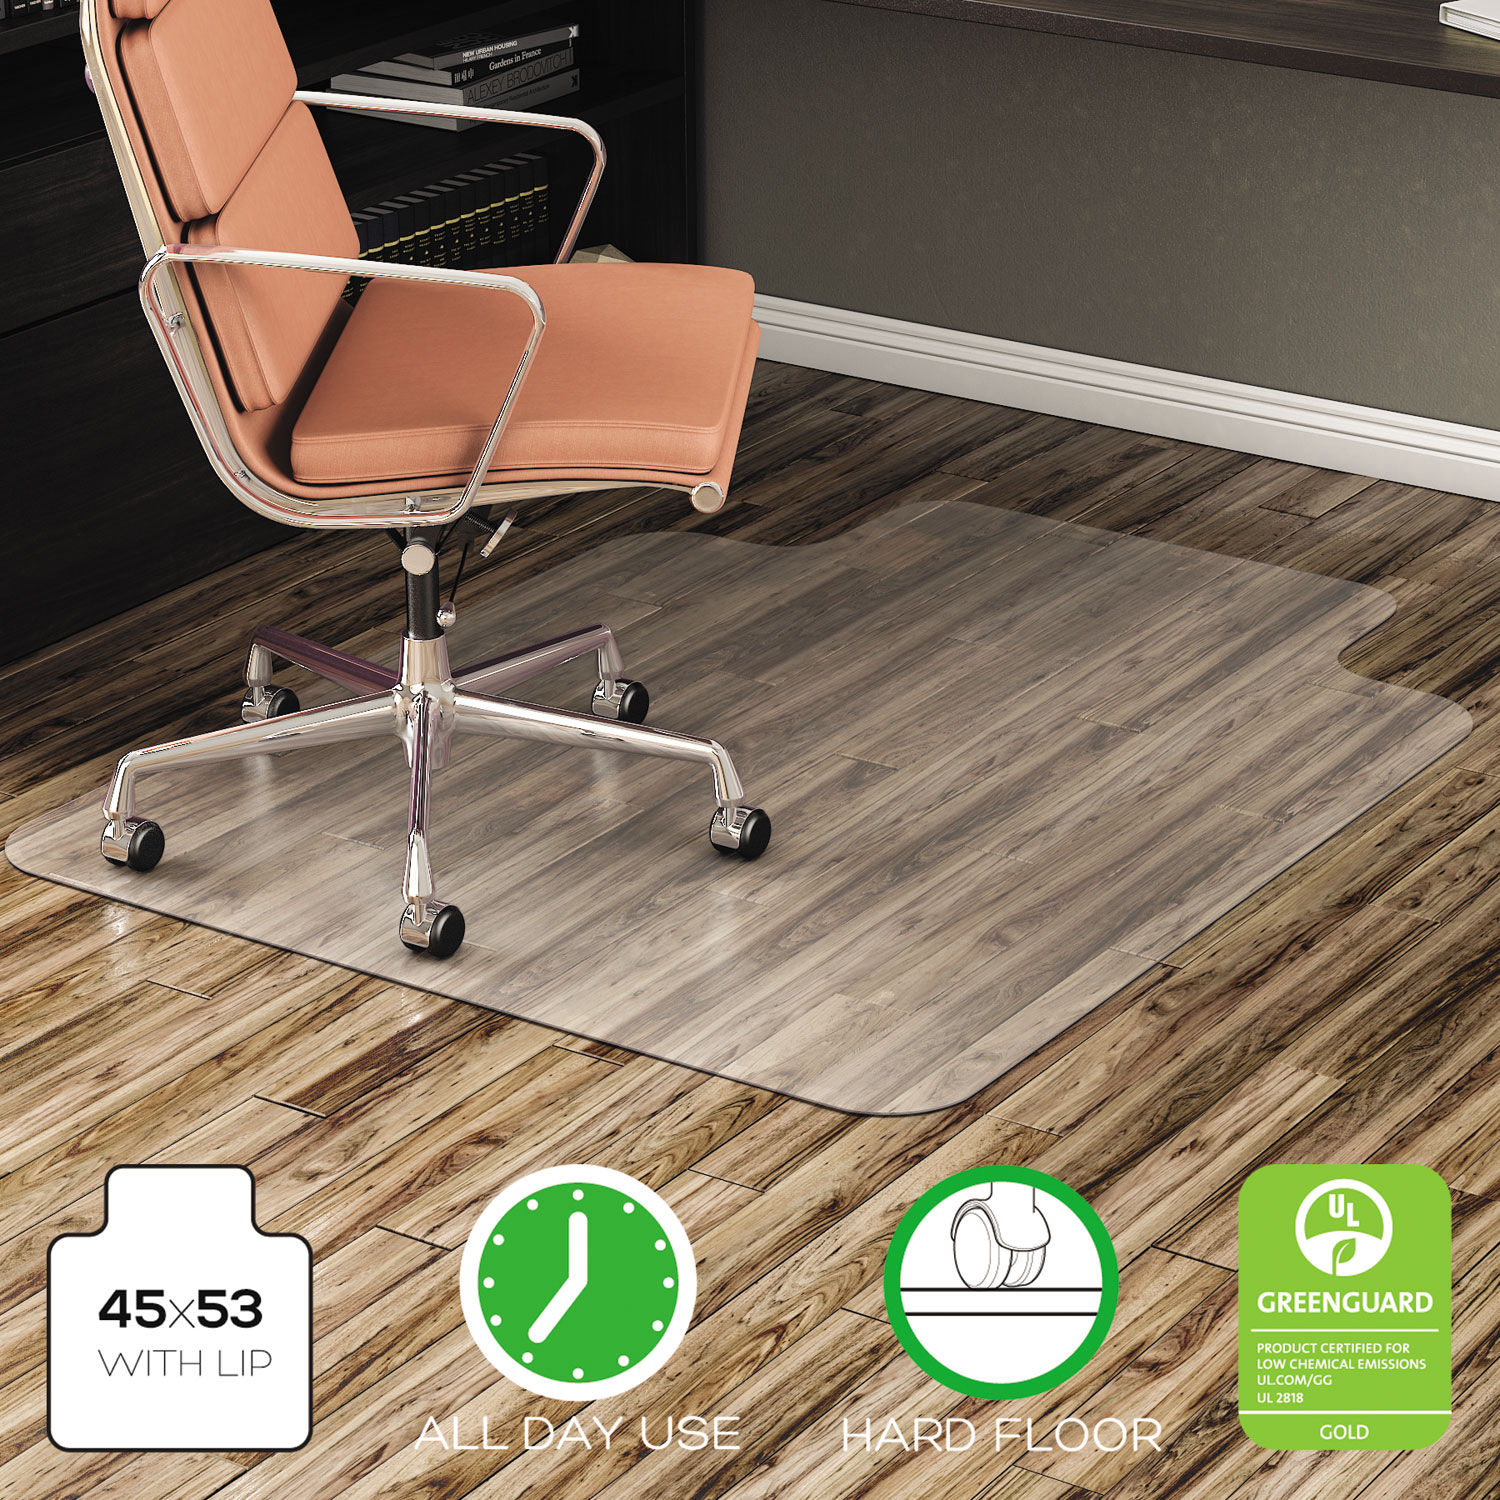 EconoMat All Day Use Chair Mat for Hard Floors Flat Packed, 45 x 53, Wide Lipped, Clear